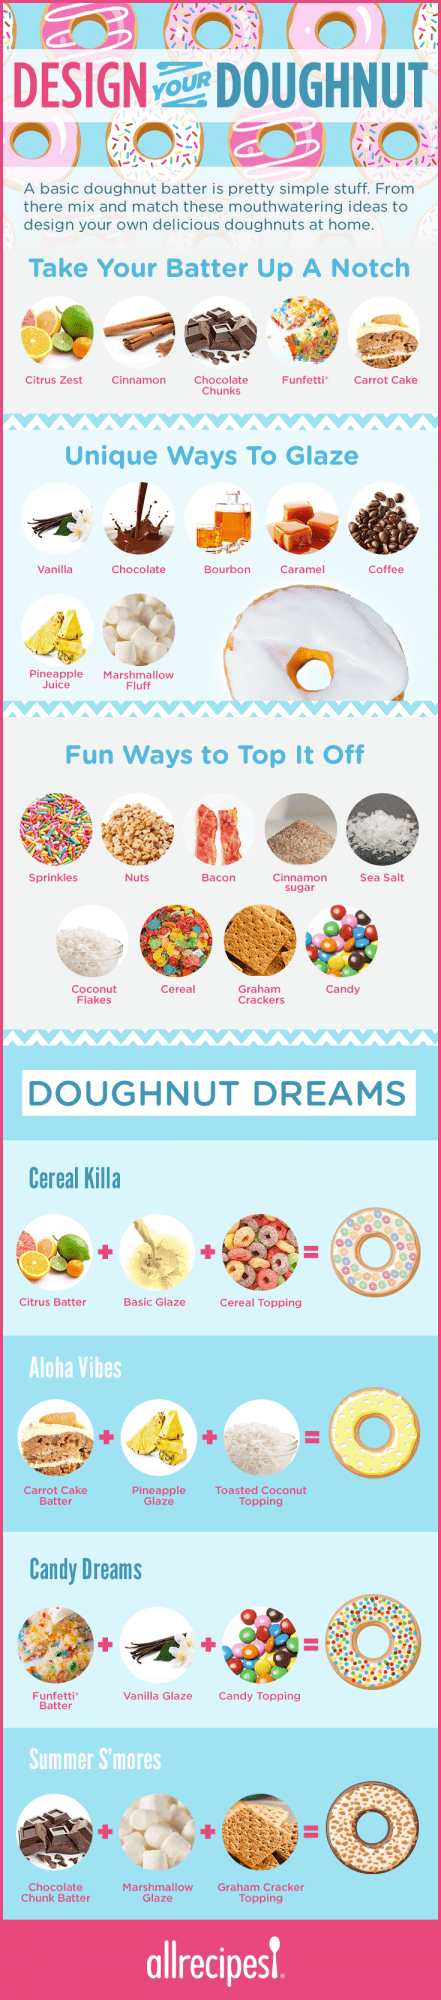 all different ways to top off homemade doughnuts